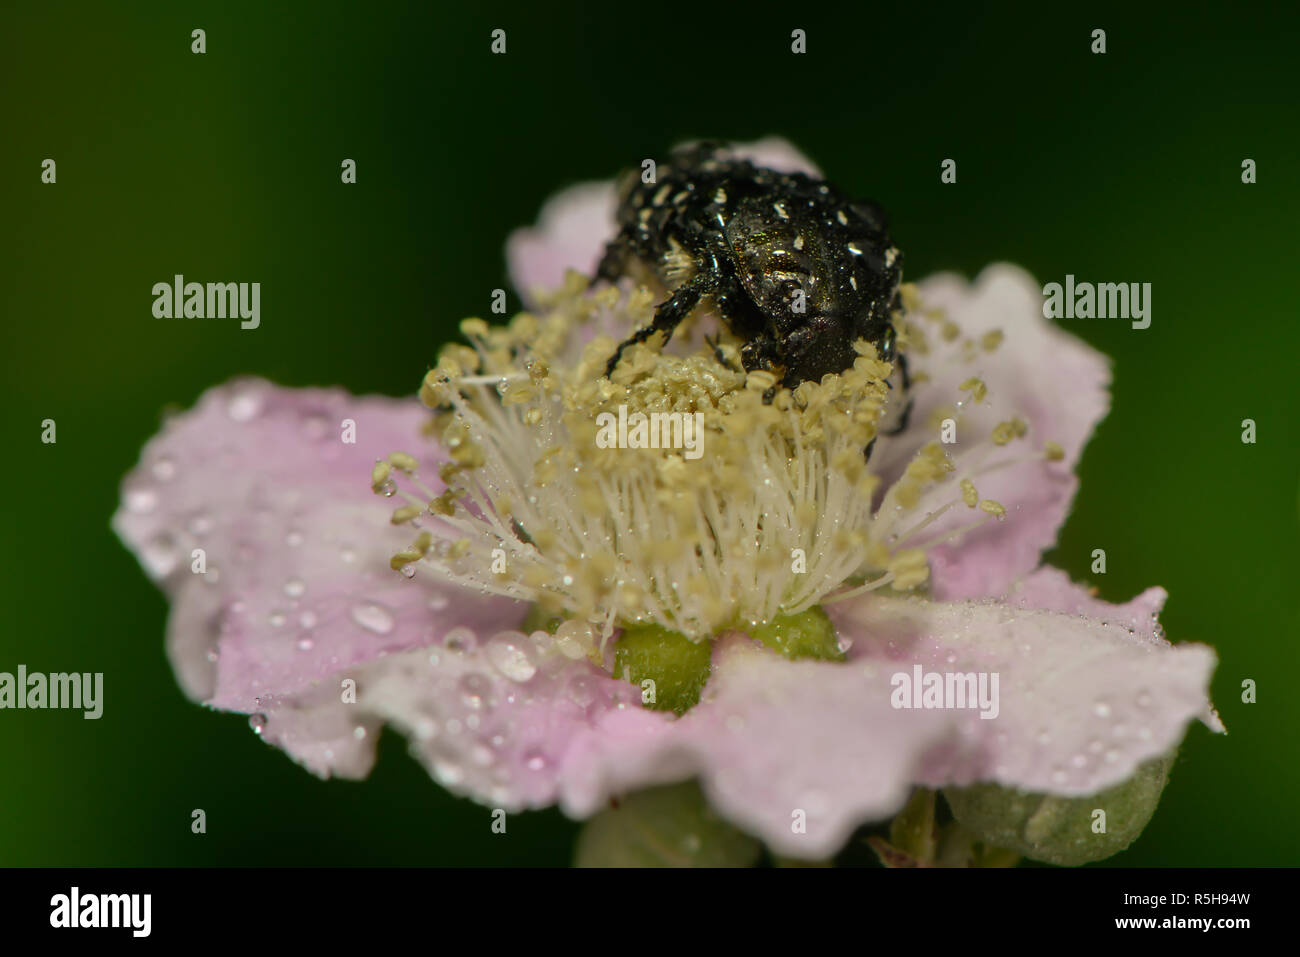 mourning rose beetle sits on a hedge-rose blossom Stock Photo